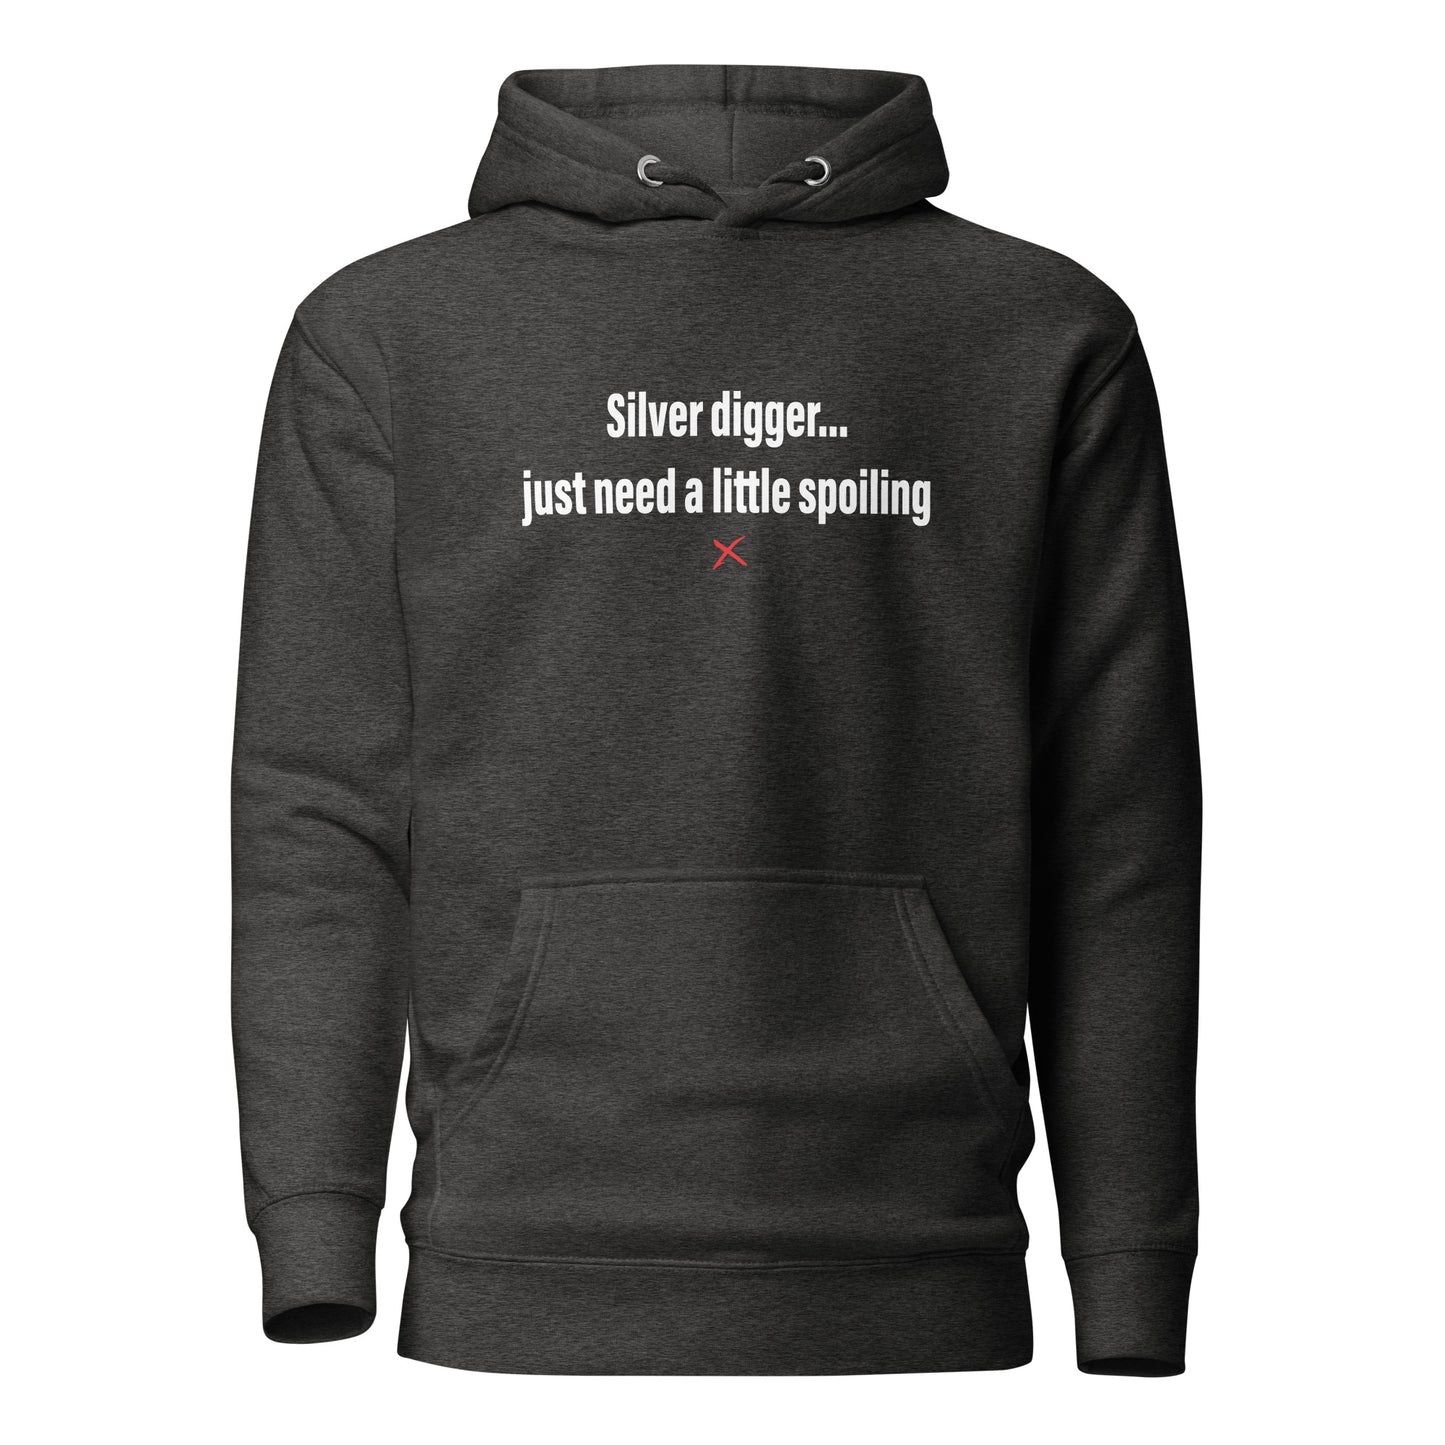 Silver digger... just need a little spoiling - Hoodie